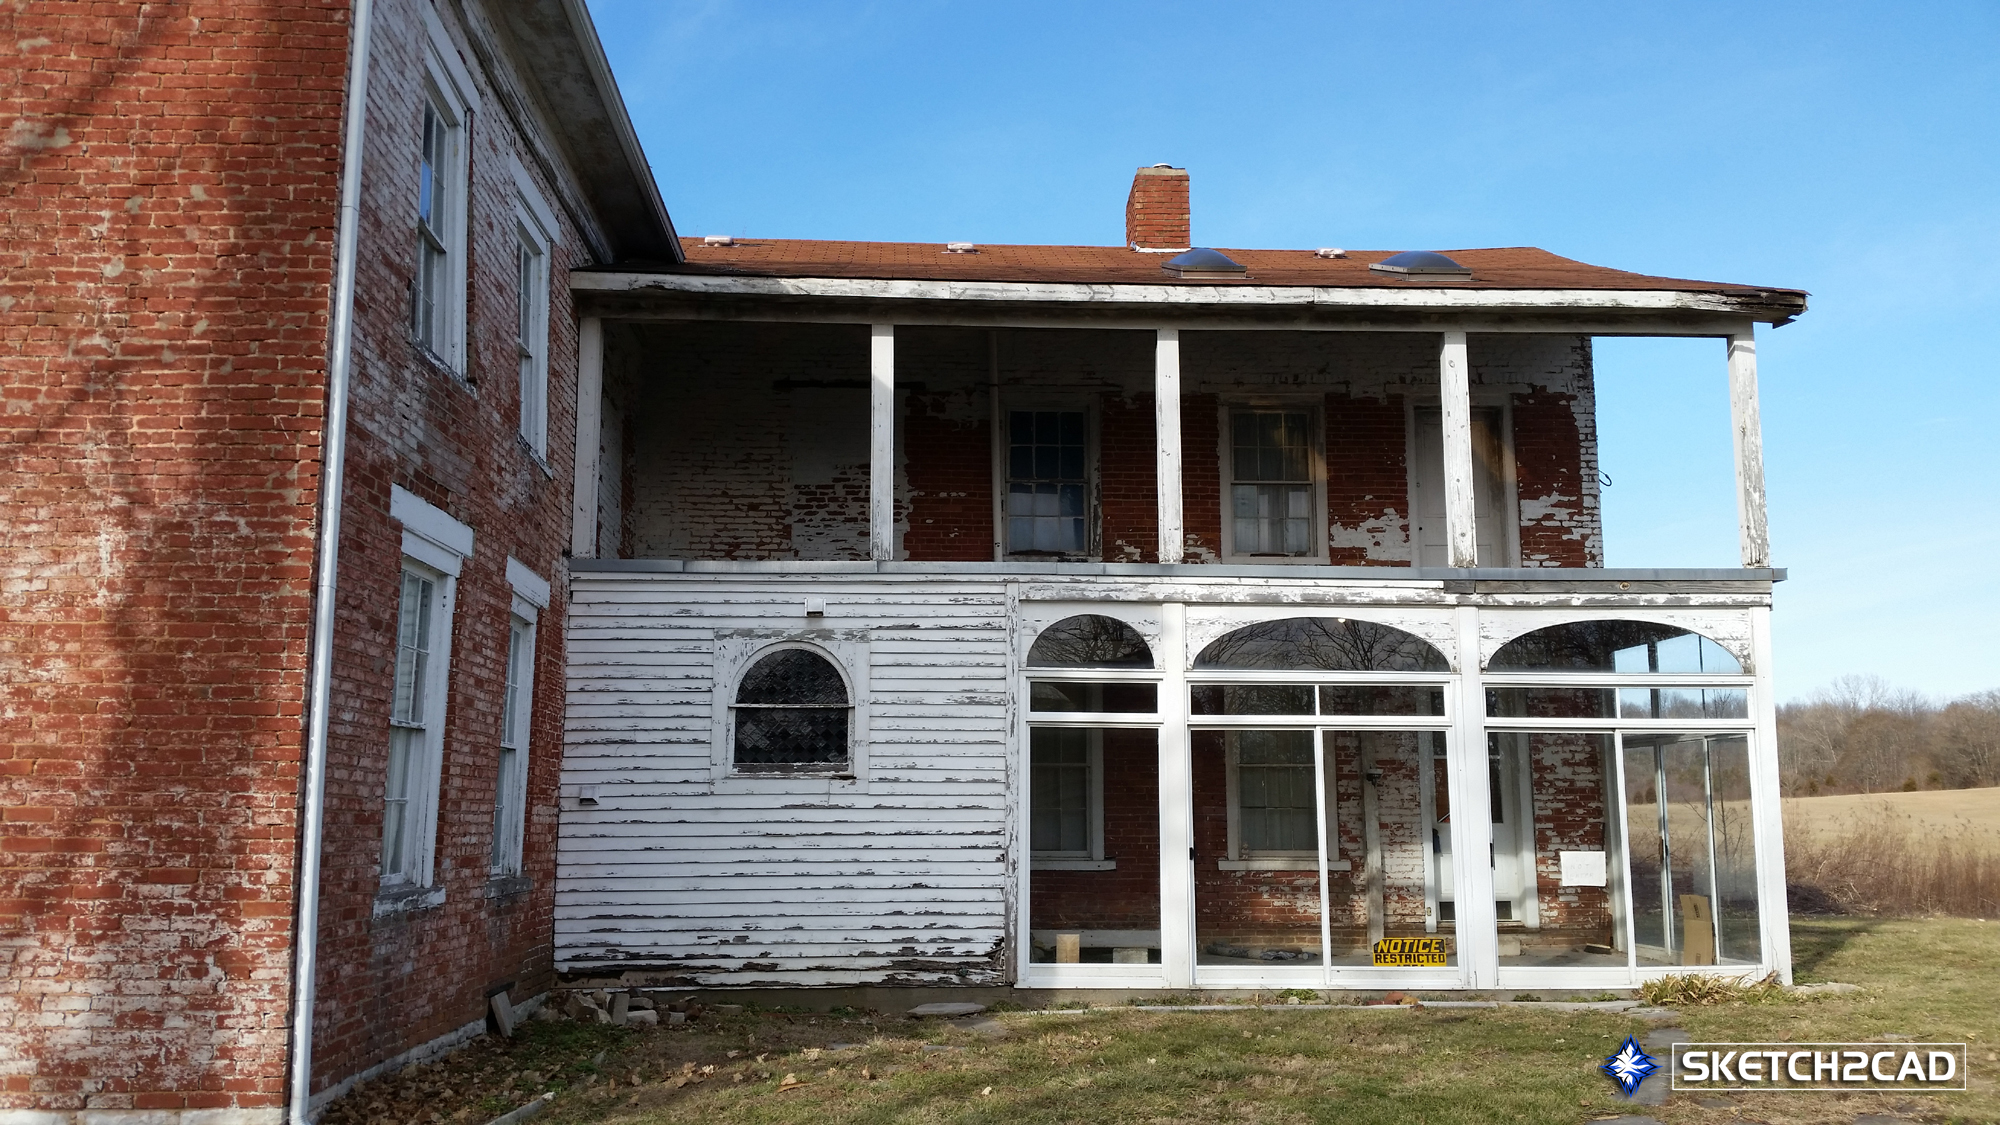 The rear porch of the Kirby-McMillian home